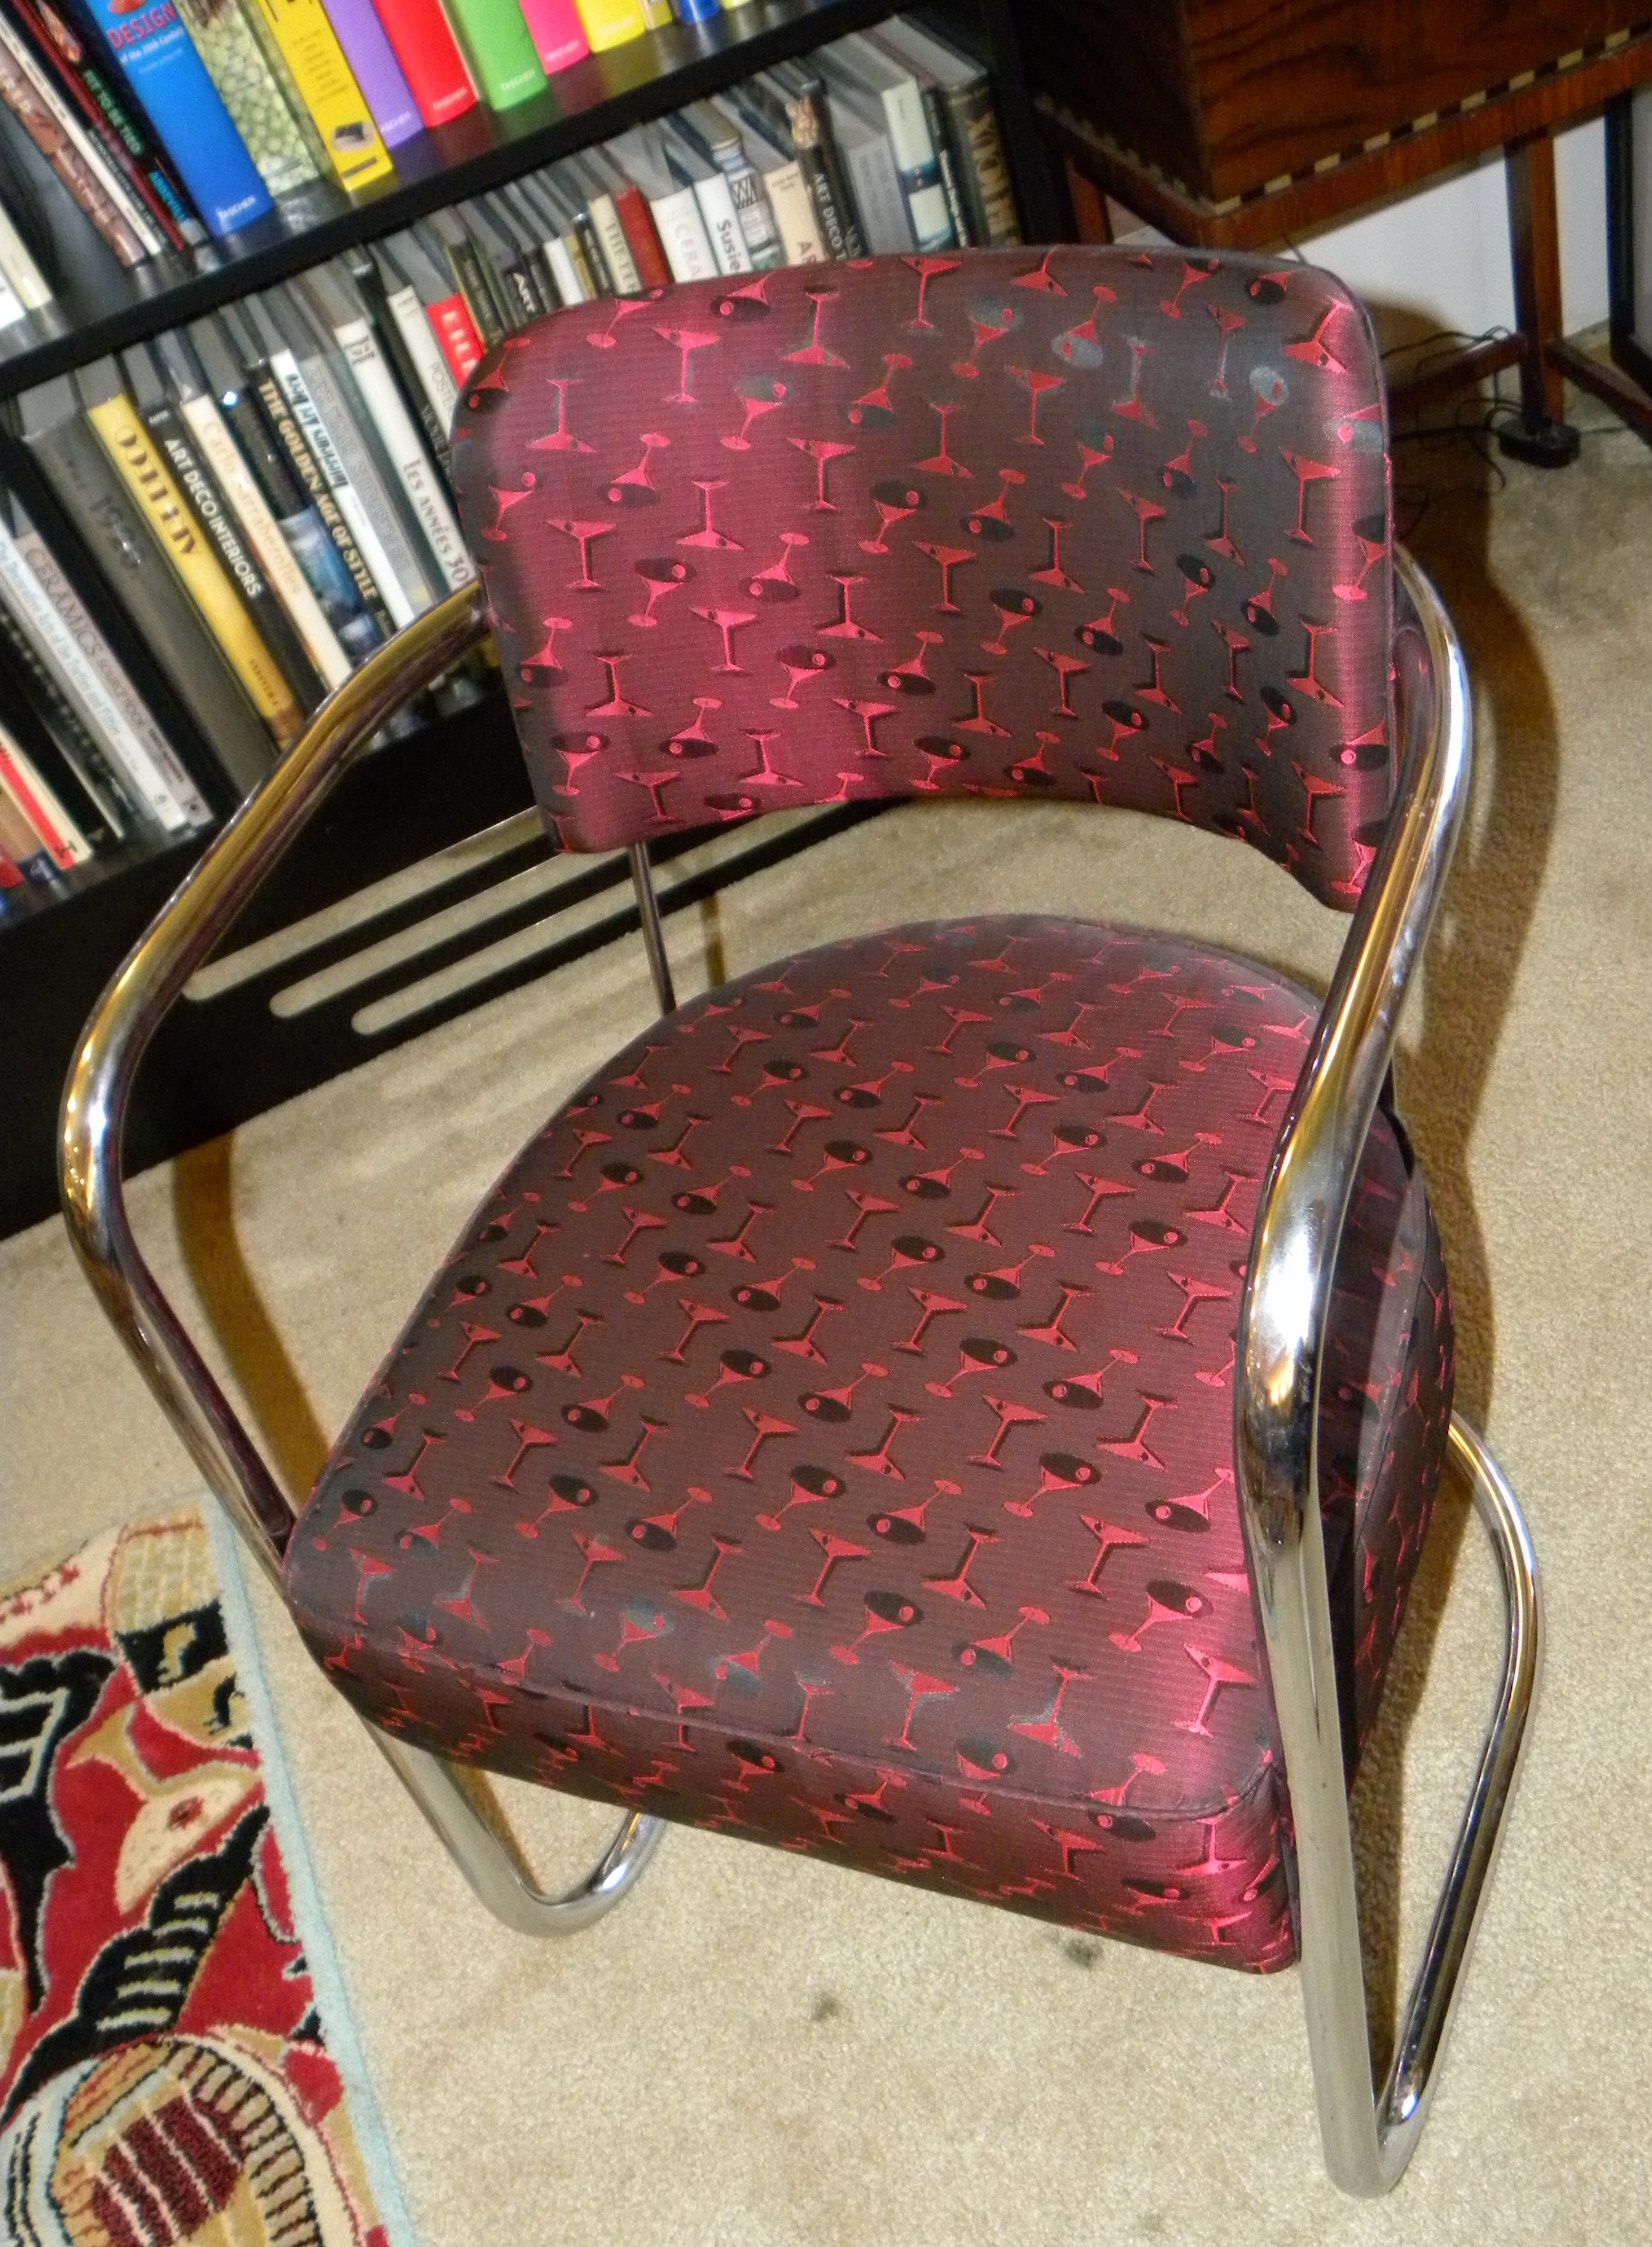 4 Streamline American Art Deco Cocktail Chairs for sale | Seating Items